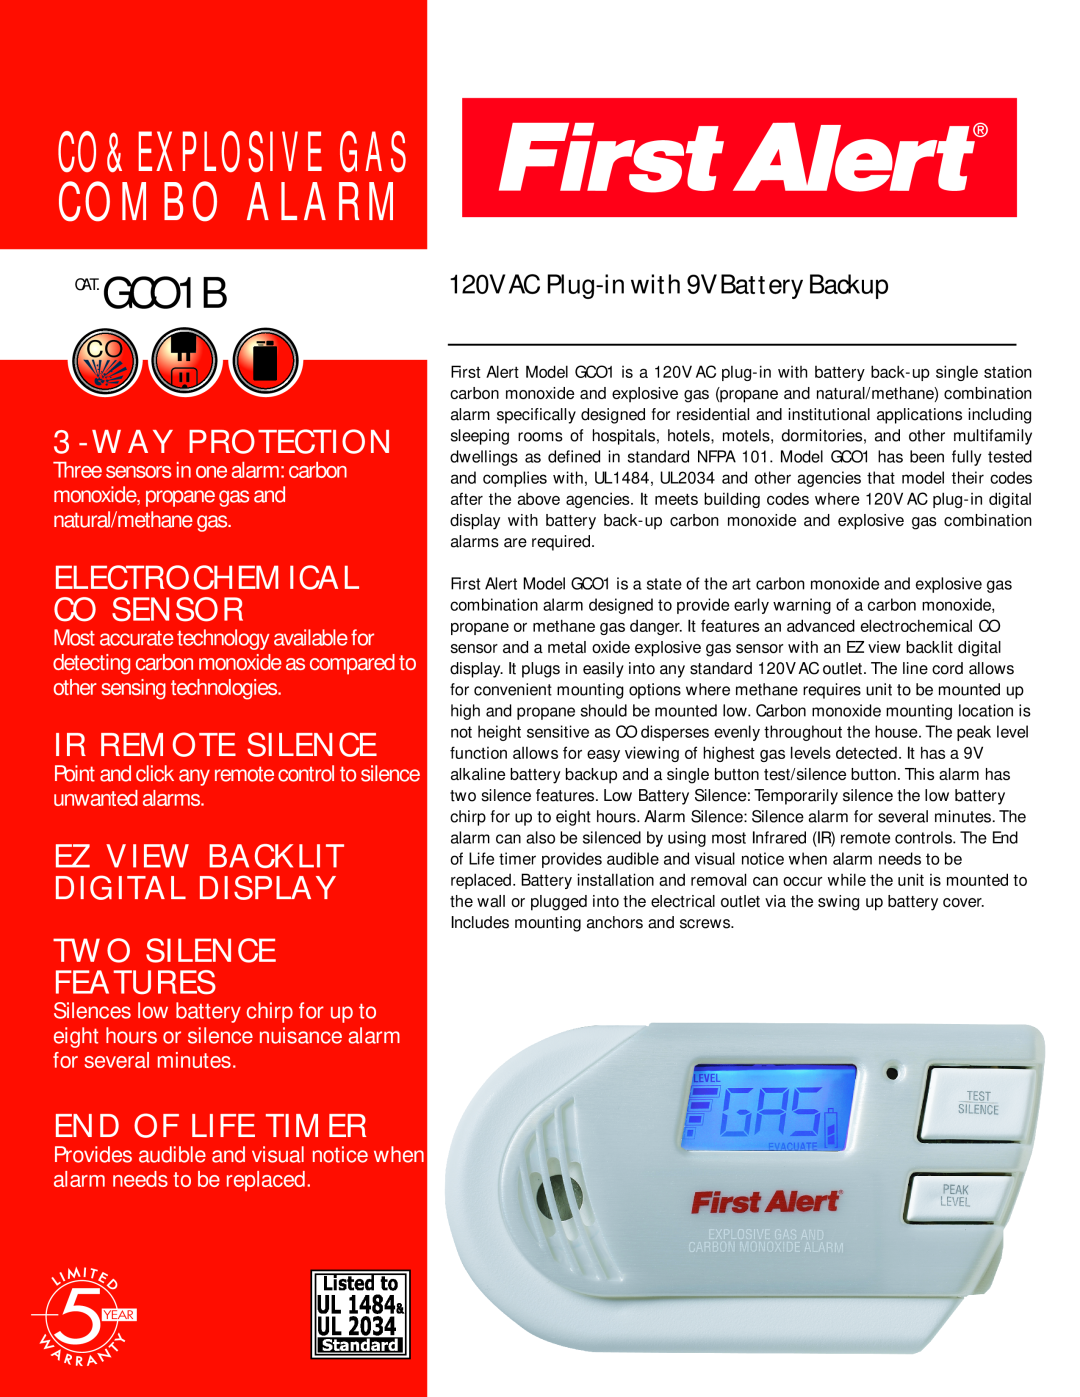 First Alert manual CAT.GCO1B, Co&Explosive Gas Combo Alarm, Wayprotection, Ir Remote Silence, Two Silence Features 